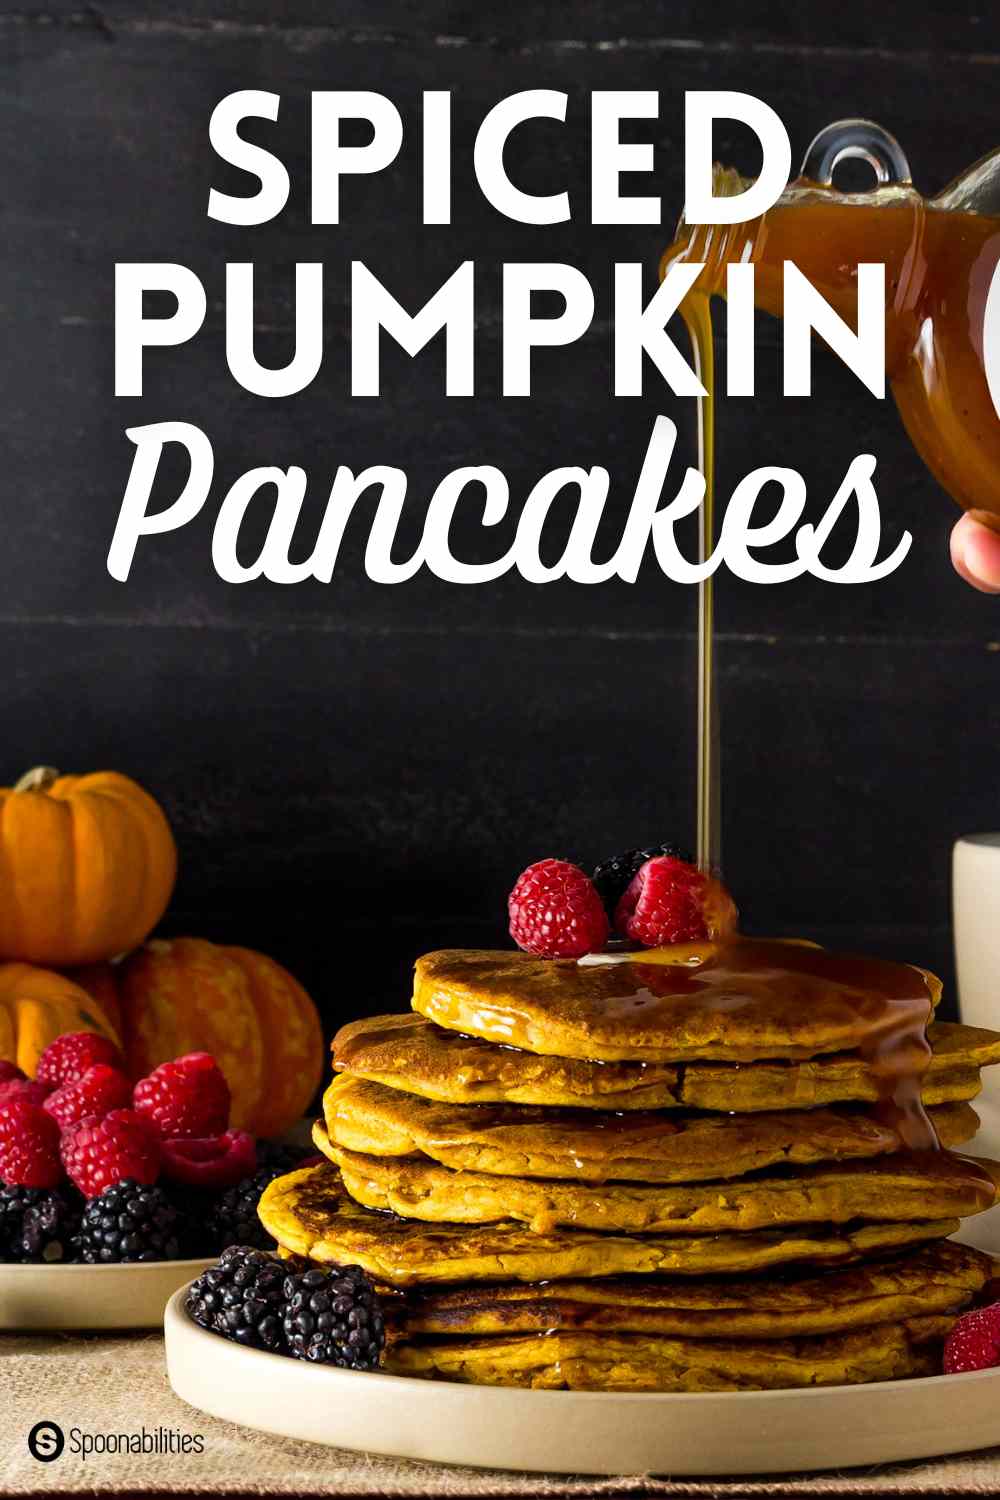 Maple syrup poured on top a stack of spiced pumpkin pancakes